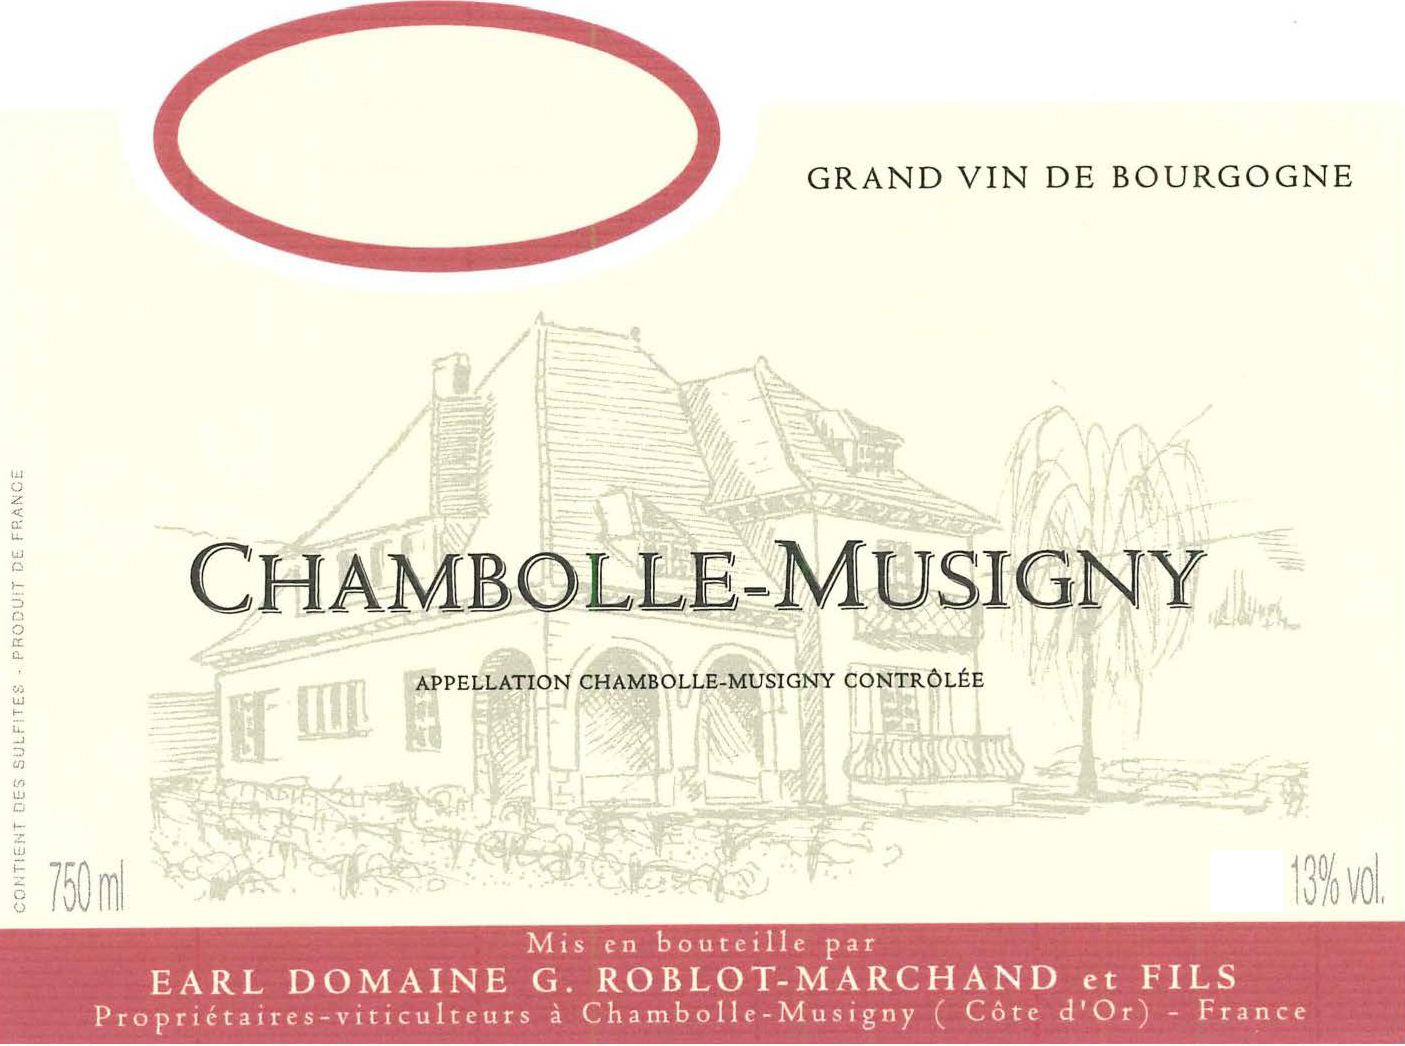 Domaine Roblot-Marchand Chambolle-Musigny label